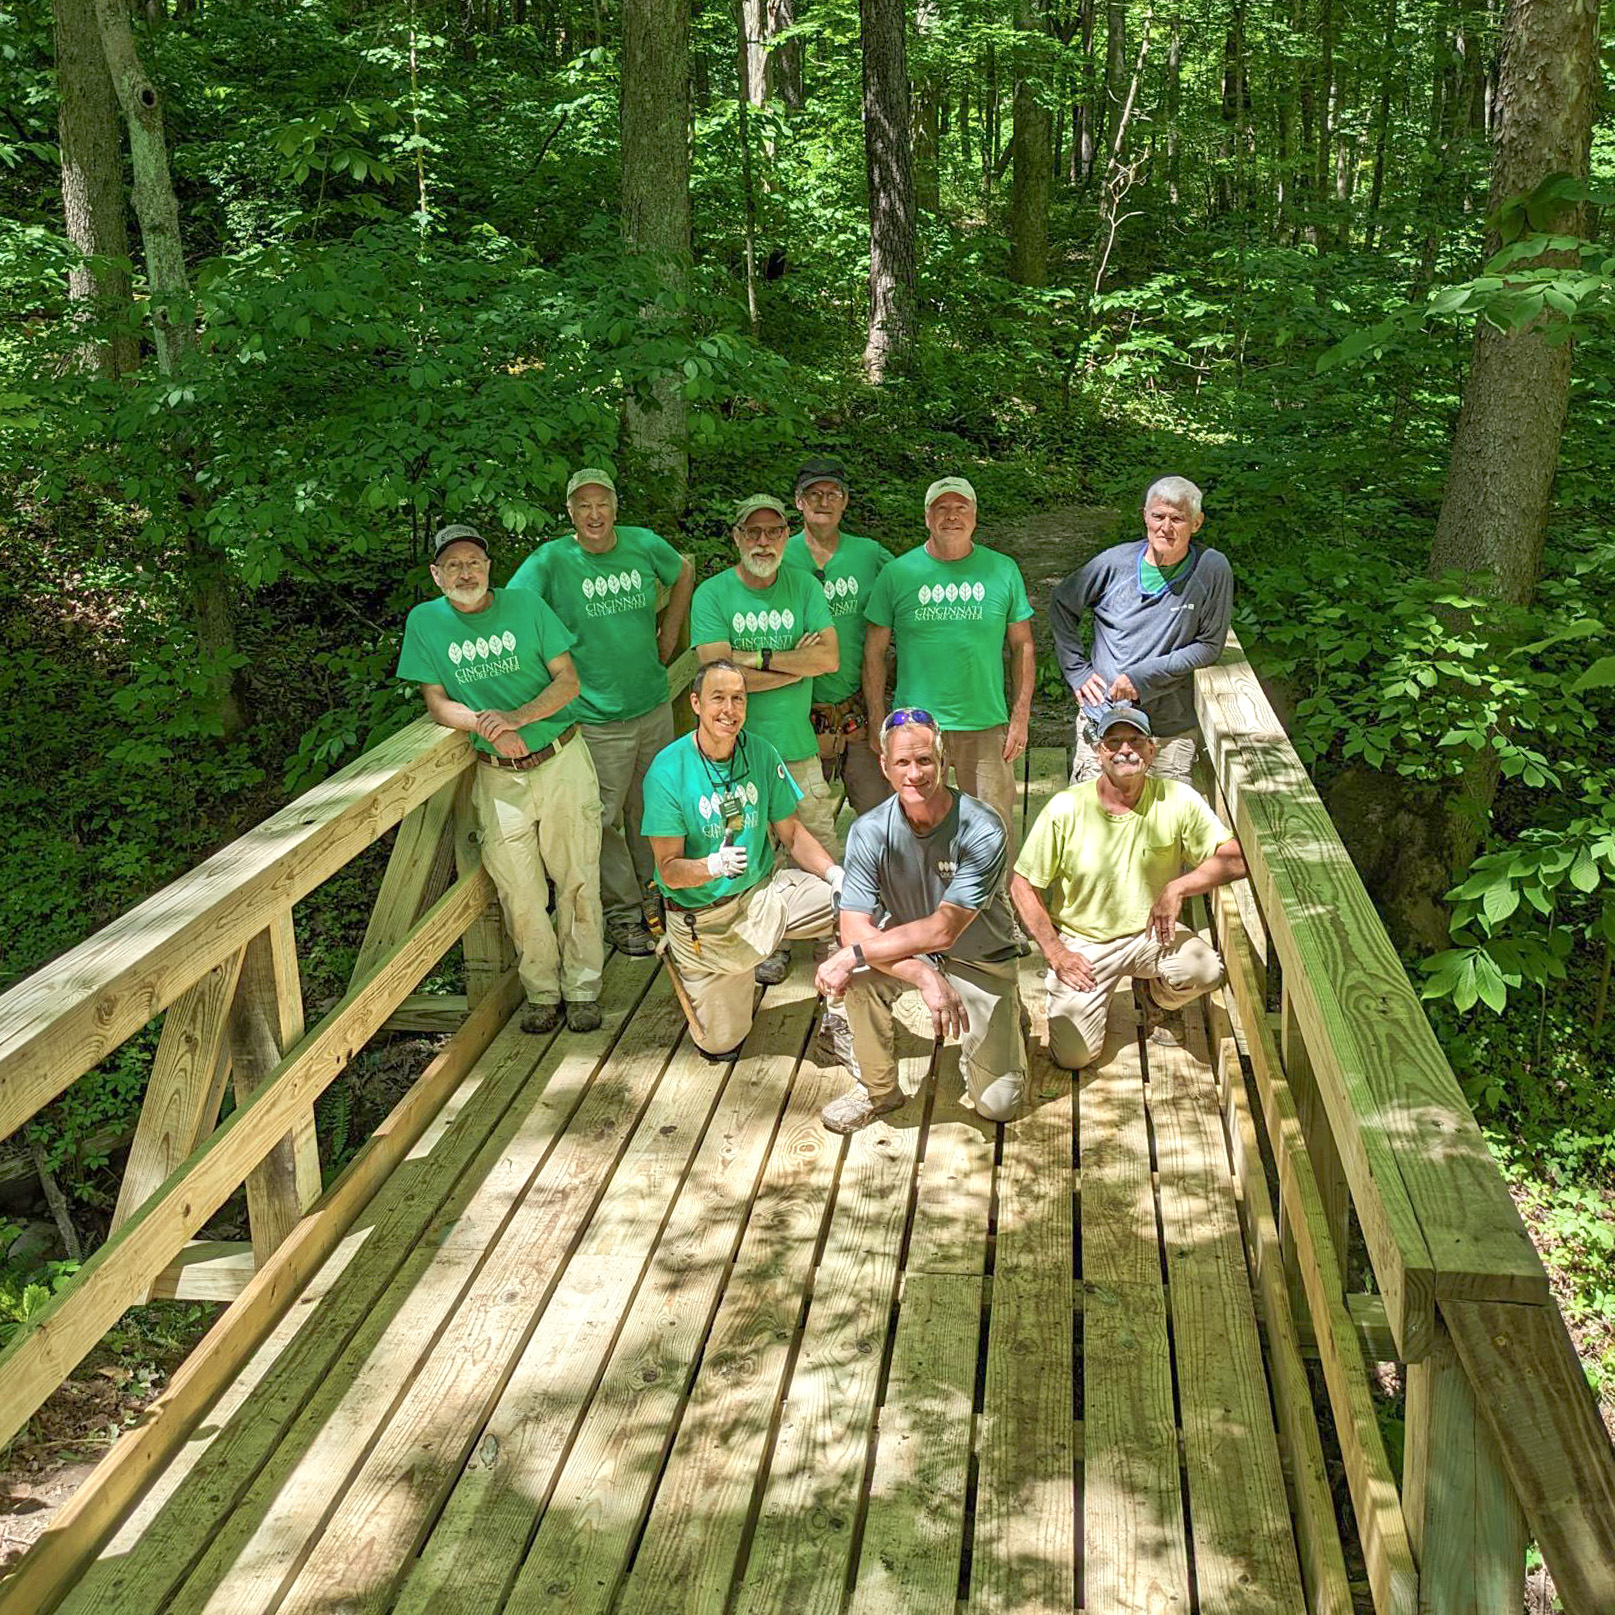 Volunteers and Troy pose for a group photo on the newly constructed bridge.